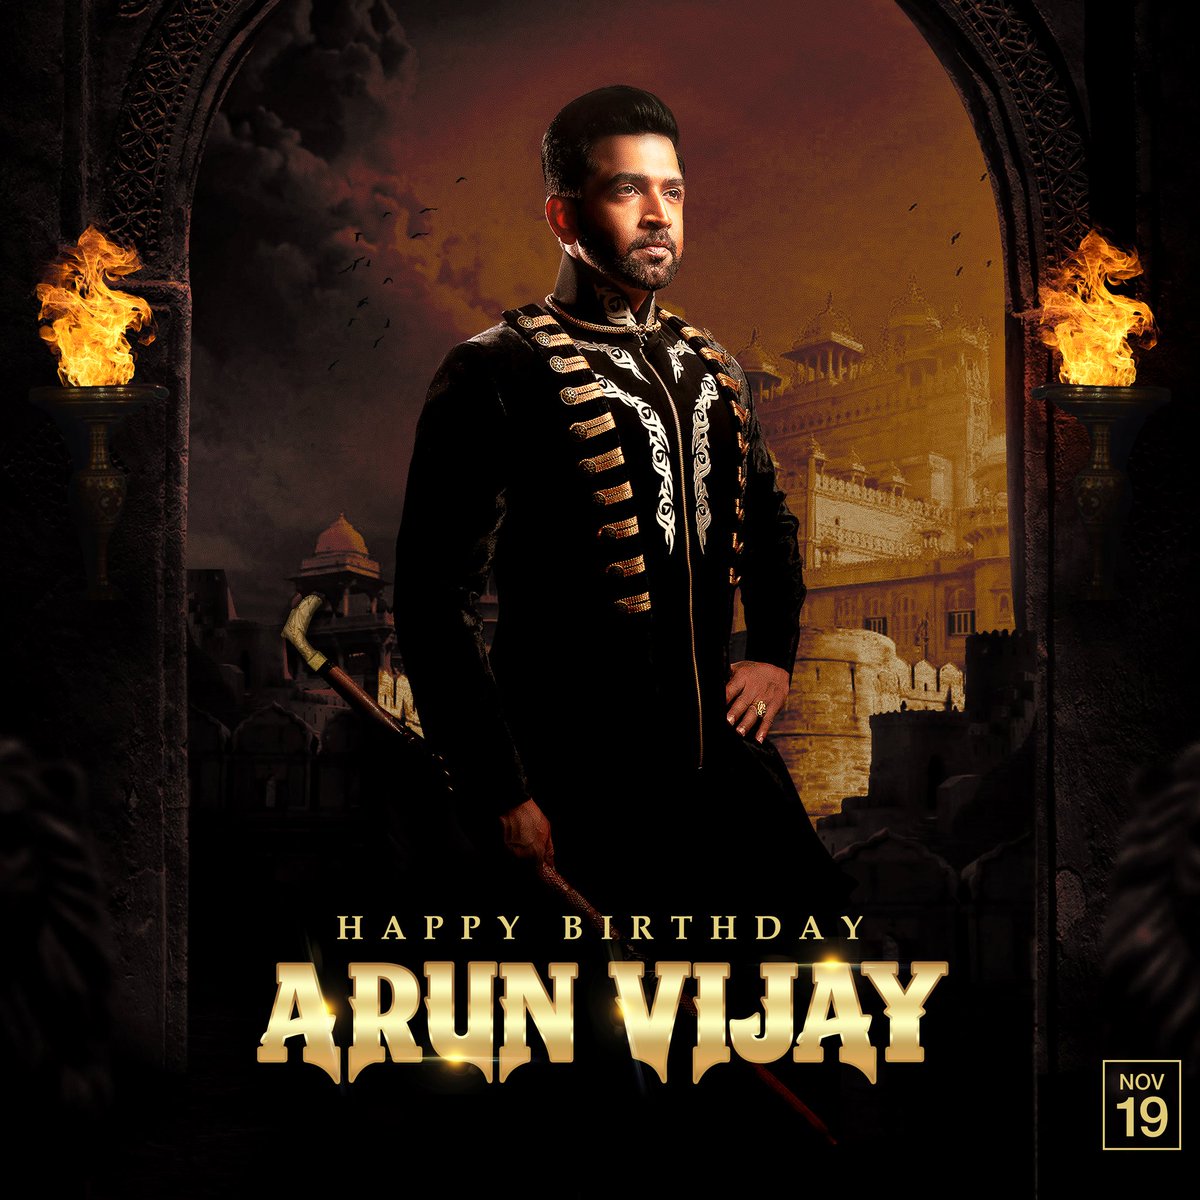 Extremely glad to release the Man of Action ARUN VIJAY 's BIRTHDAY CDP now...